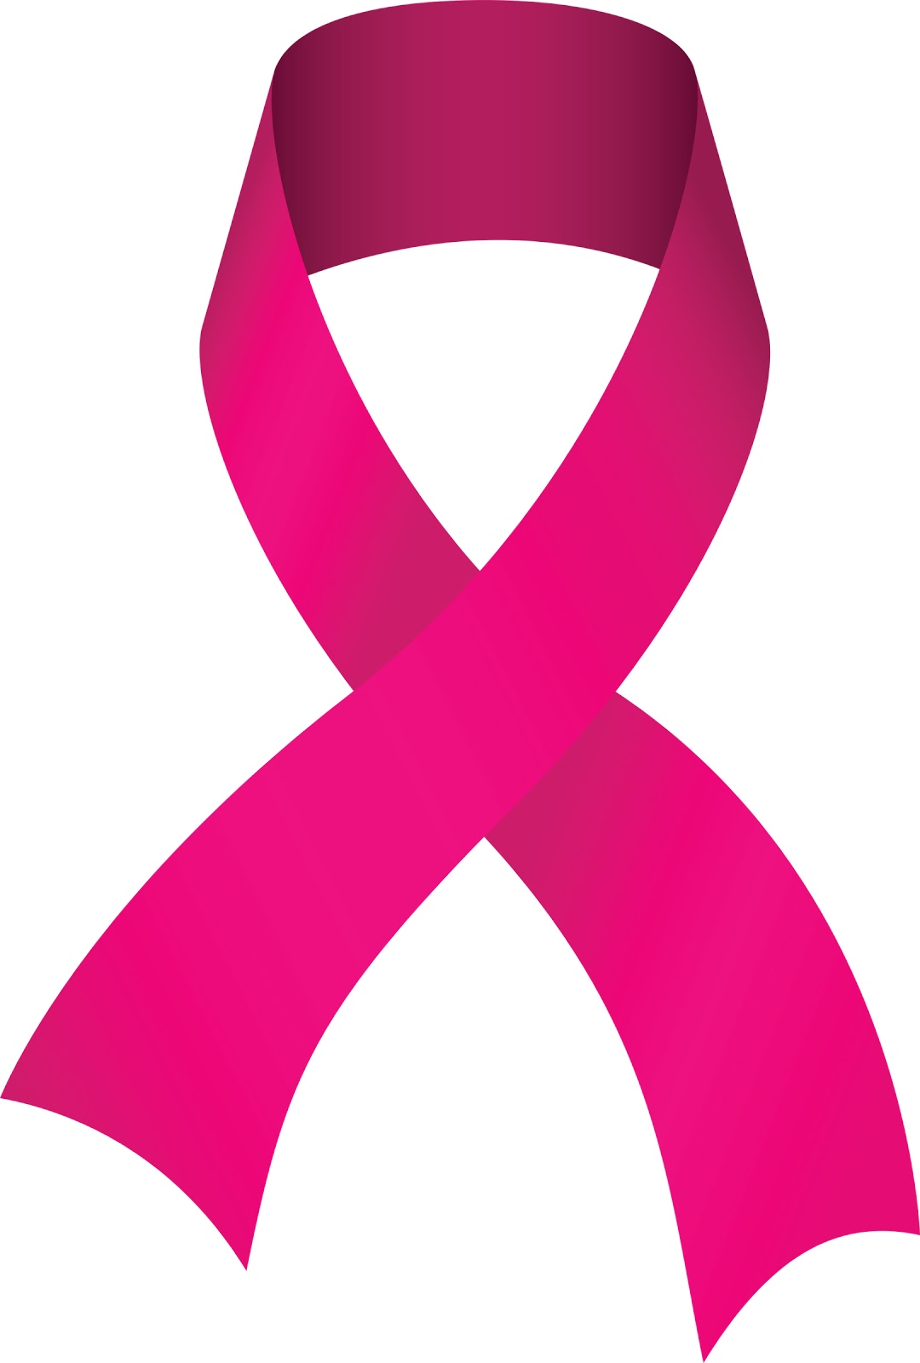 cancer ribbon clipart pink